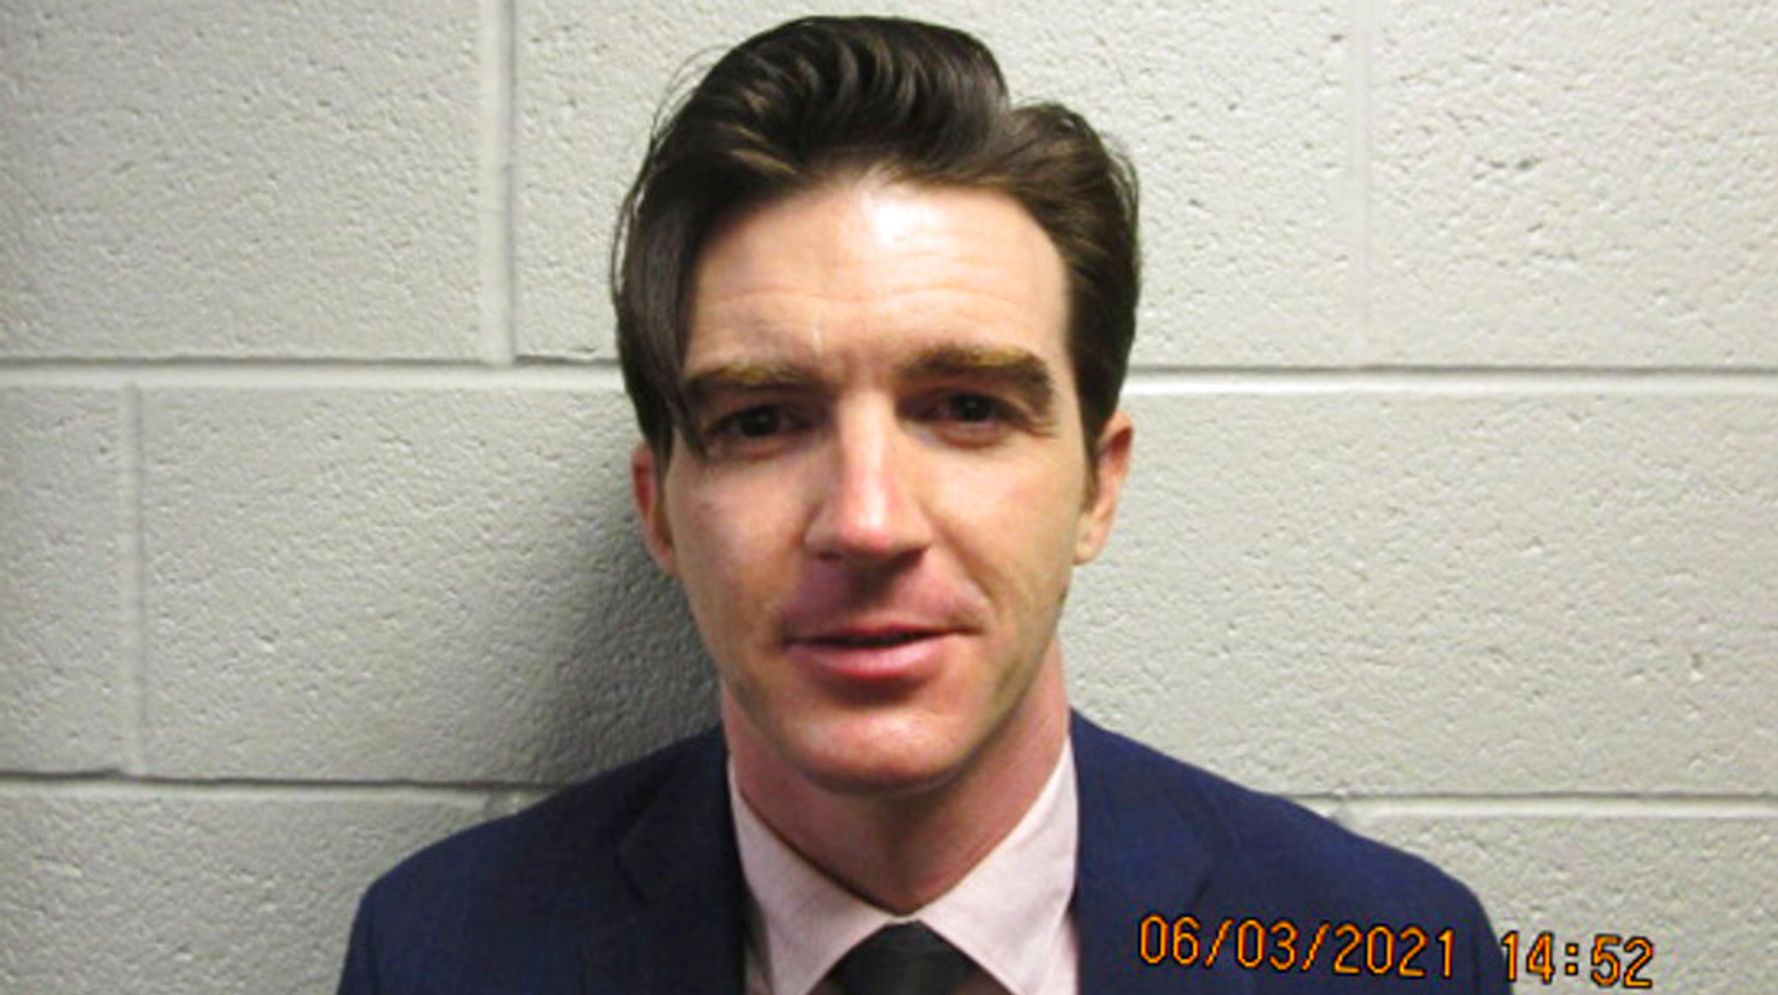 Ex-Child Actor Drake Bell Pleads Guilty To Attempted Child Endangerment